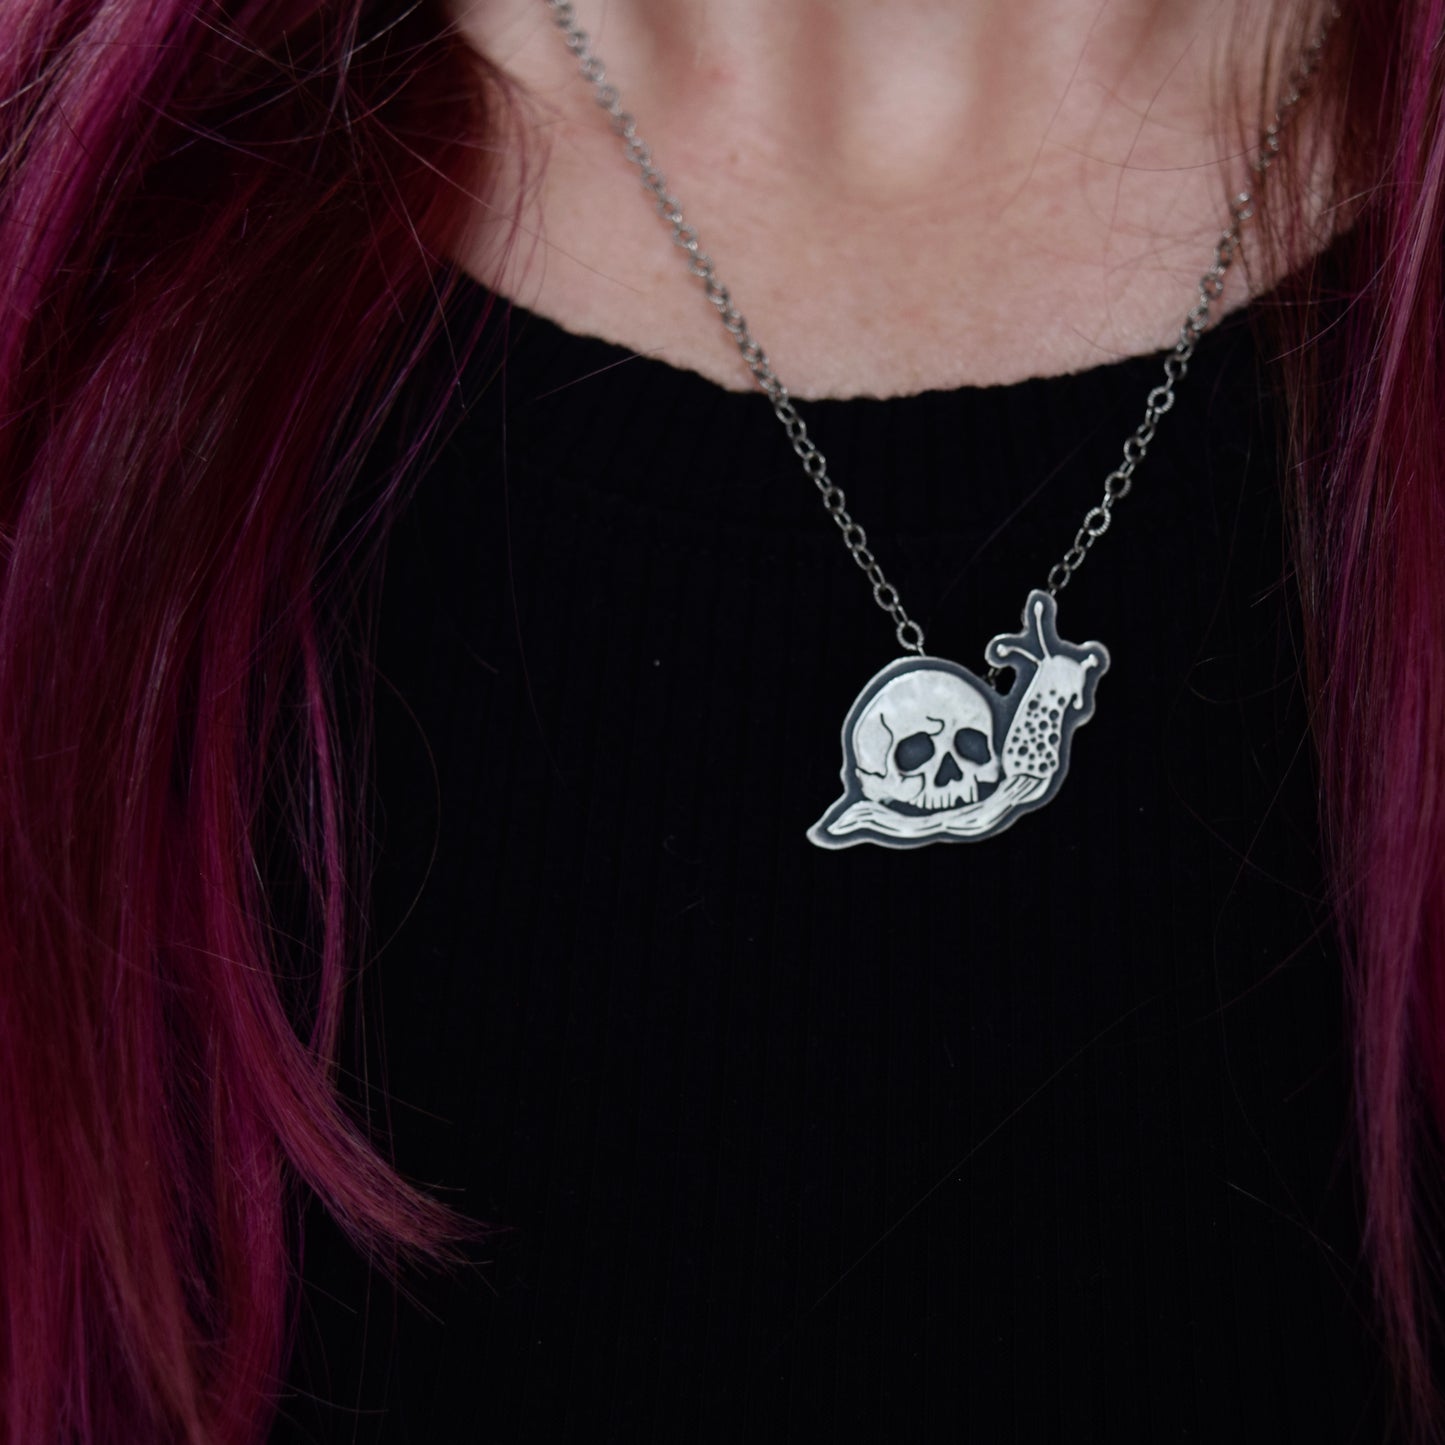 Life and Death Snail Necklace